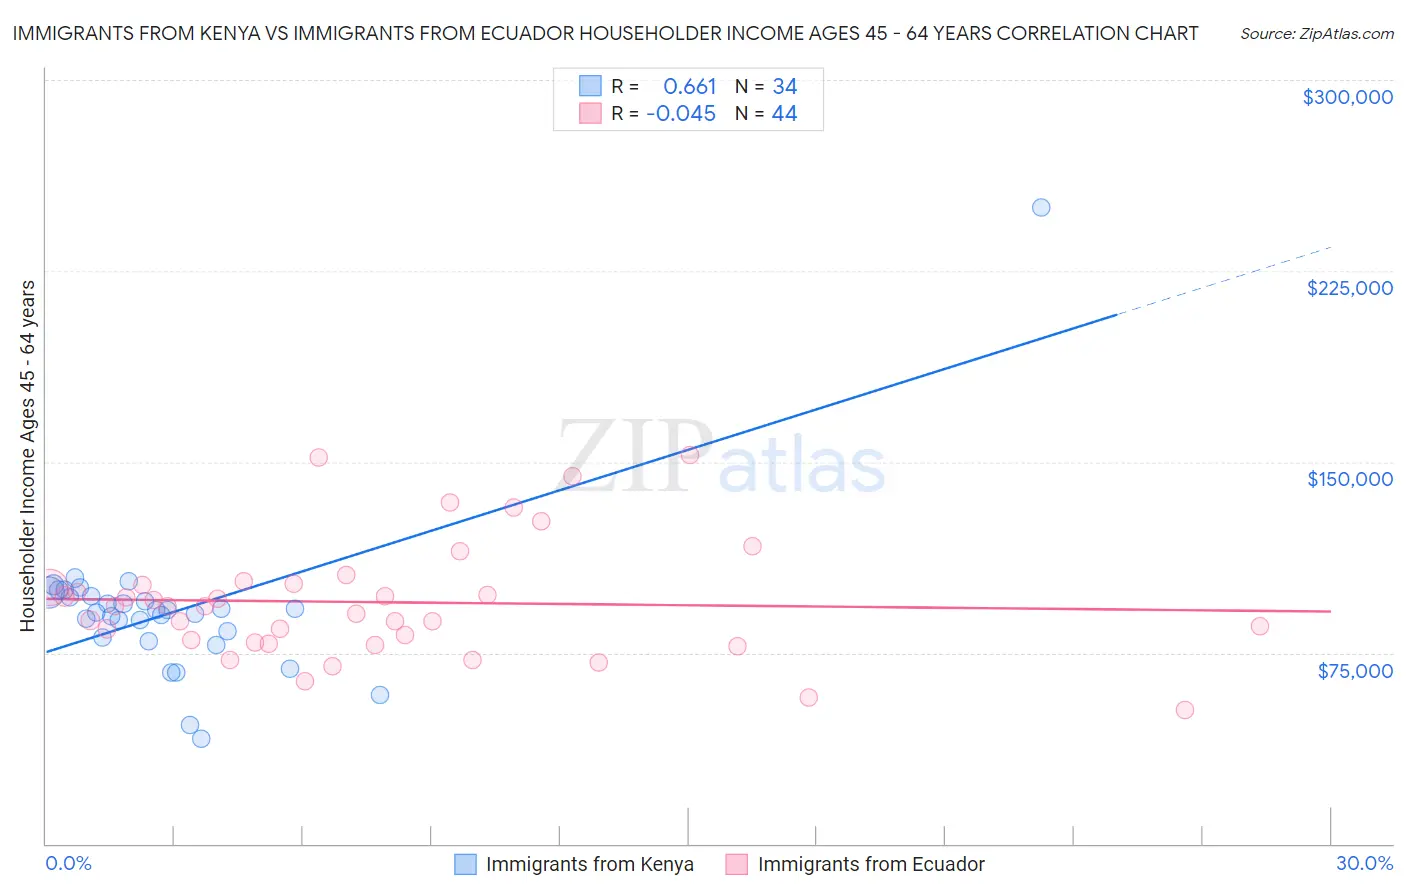 Immigrants from Kenya vs Immigrants from Ecuador Householder Income Ages 45 - 64 years